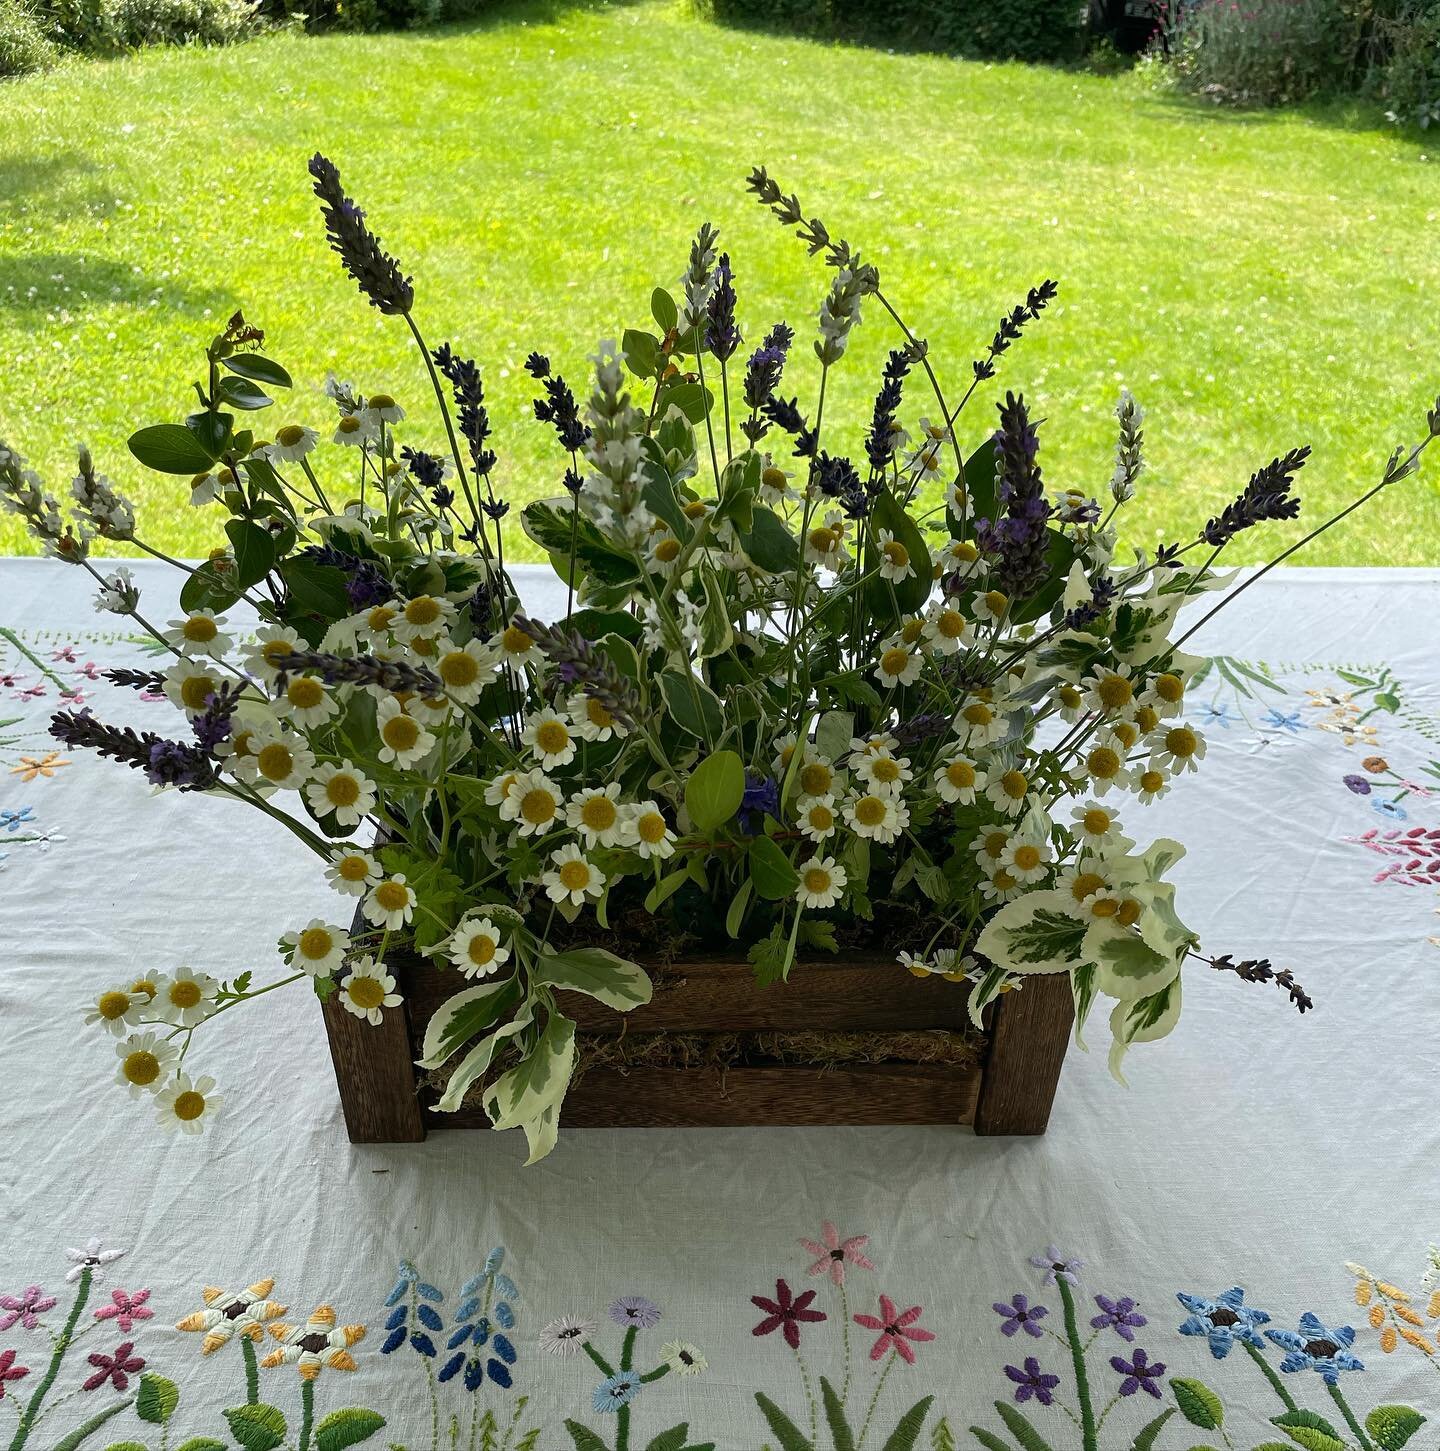 Refreshing the table flowers. 
Must get on with some work but cool under the gazebo! 
🌸🌱🌼🌱🌸
#embroideredtablecloth 
#tabledecoration 
#summertable
#summerflowers
#flowers
#gardenflowers 
#lavender